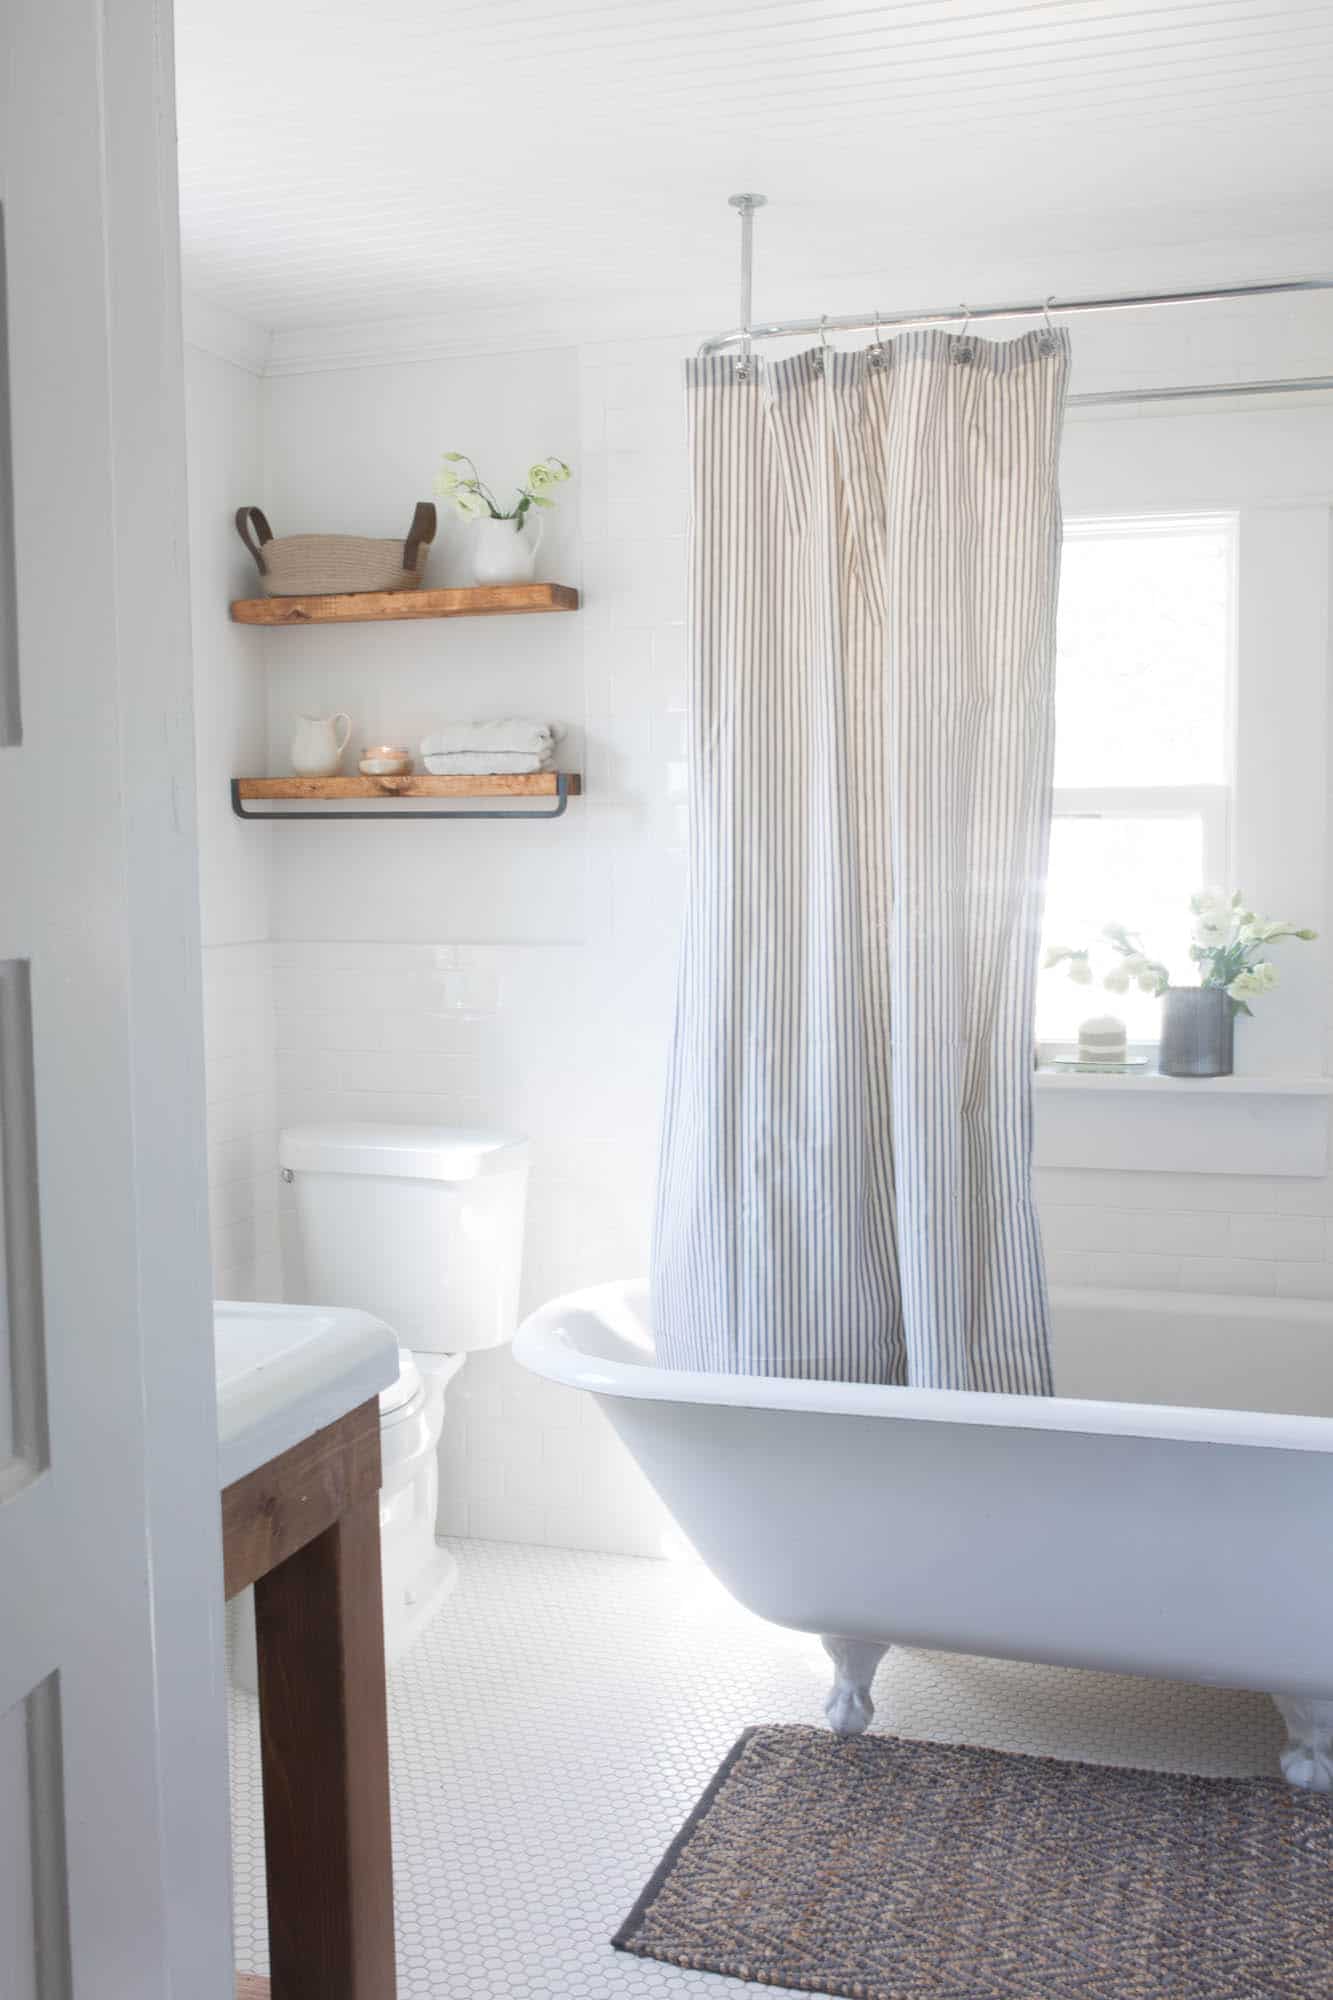 Farmhouse Bathroom Makeover Clawfoot Tub and Floating Shelves